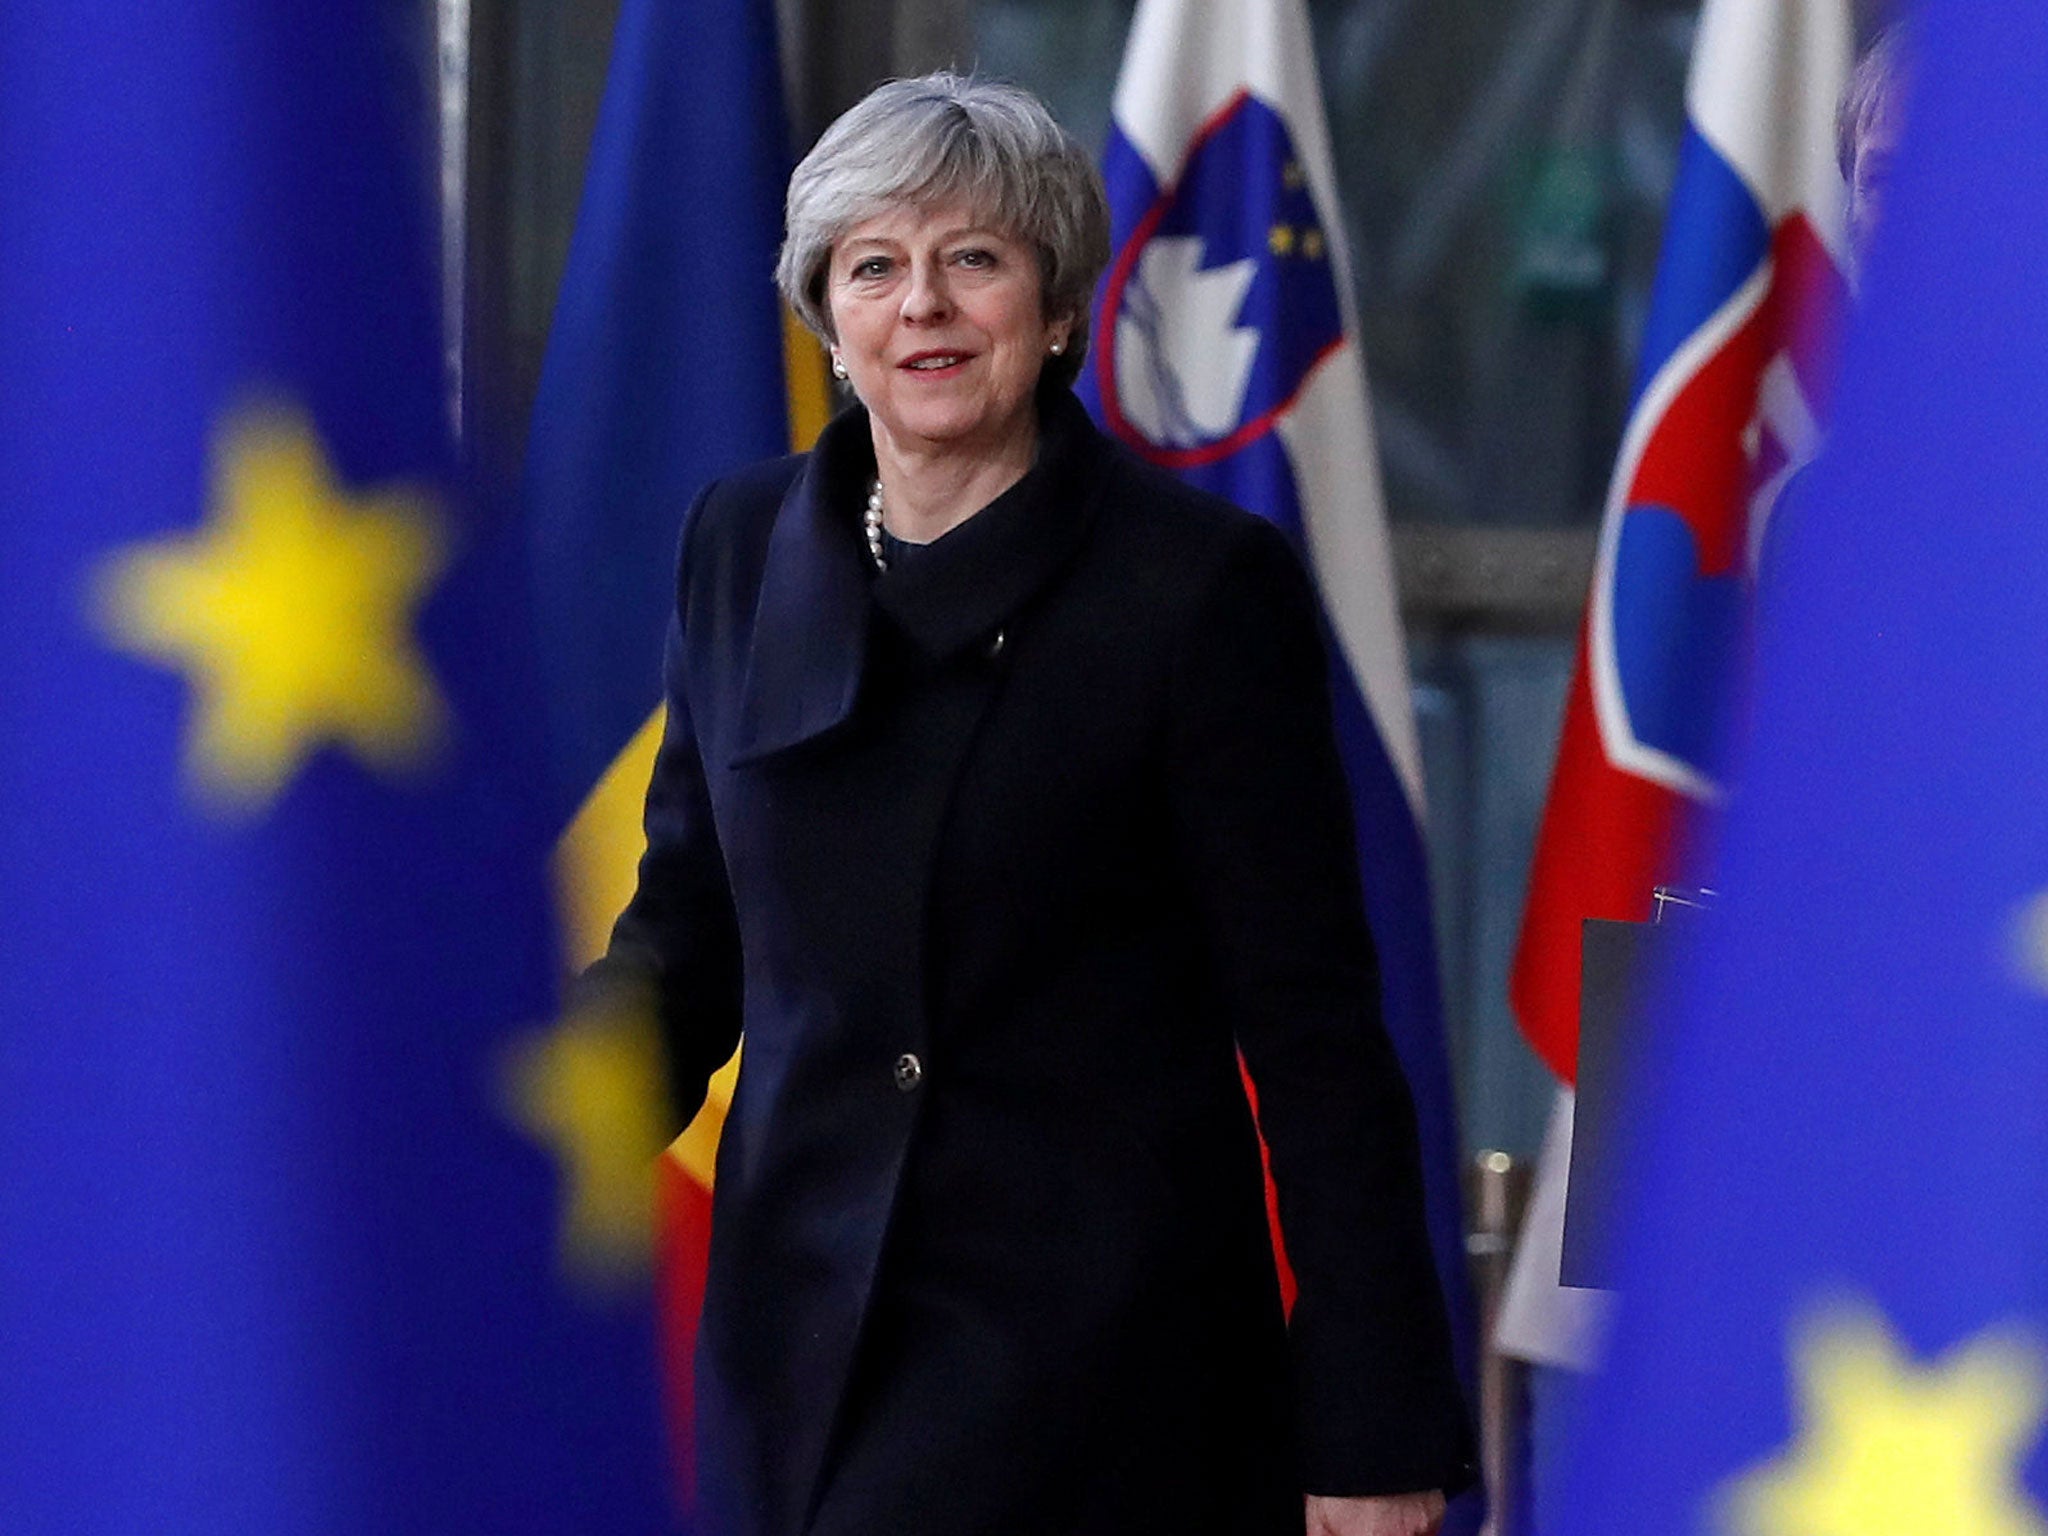 The Prime Minister has condemned the abuse received by the MPs who inflicted her first Commons defeat on her Brexit bill